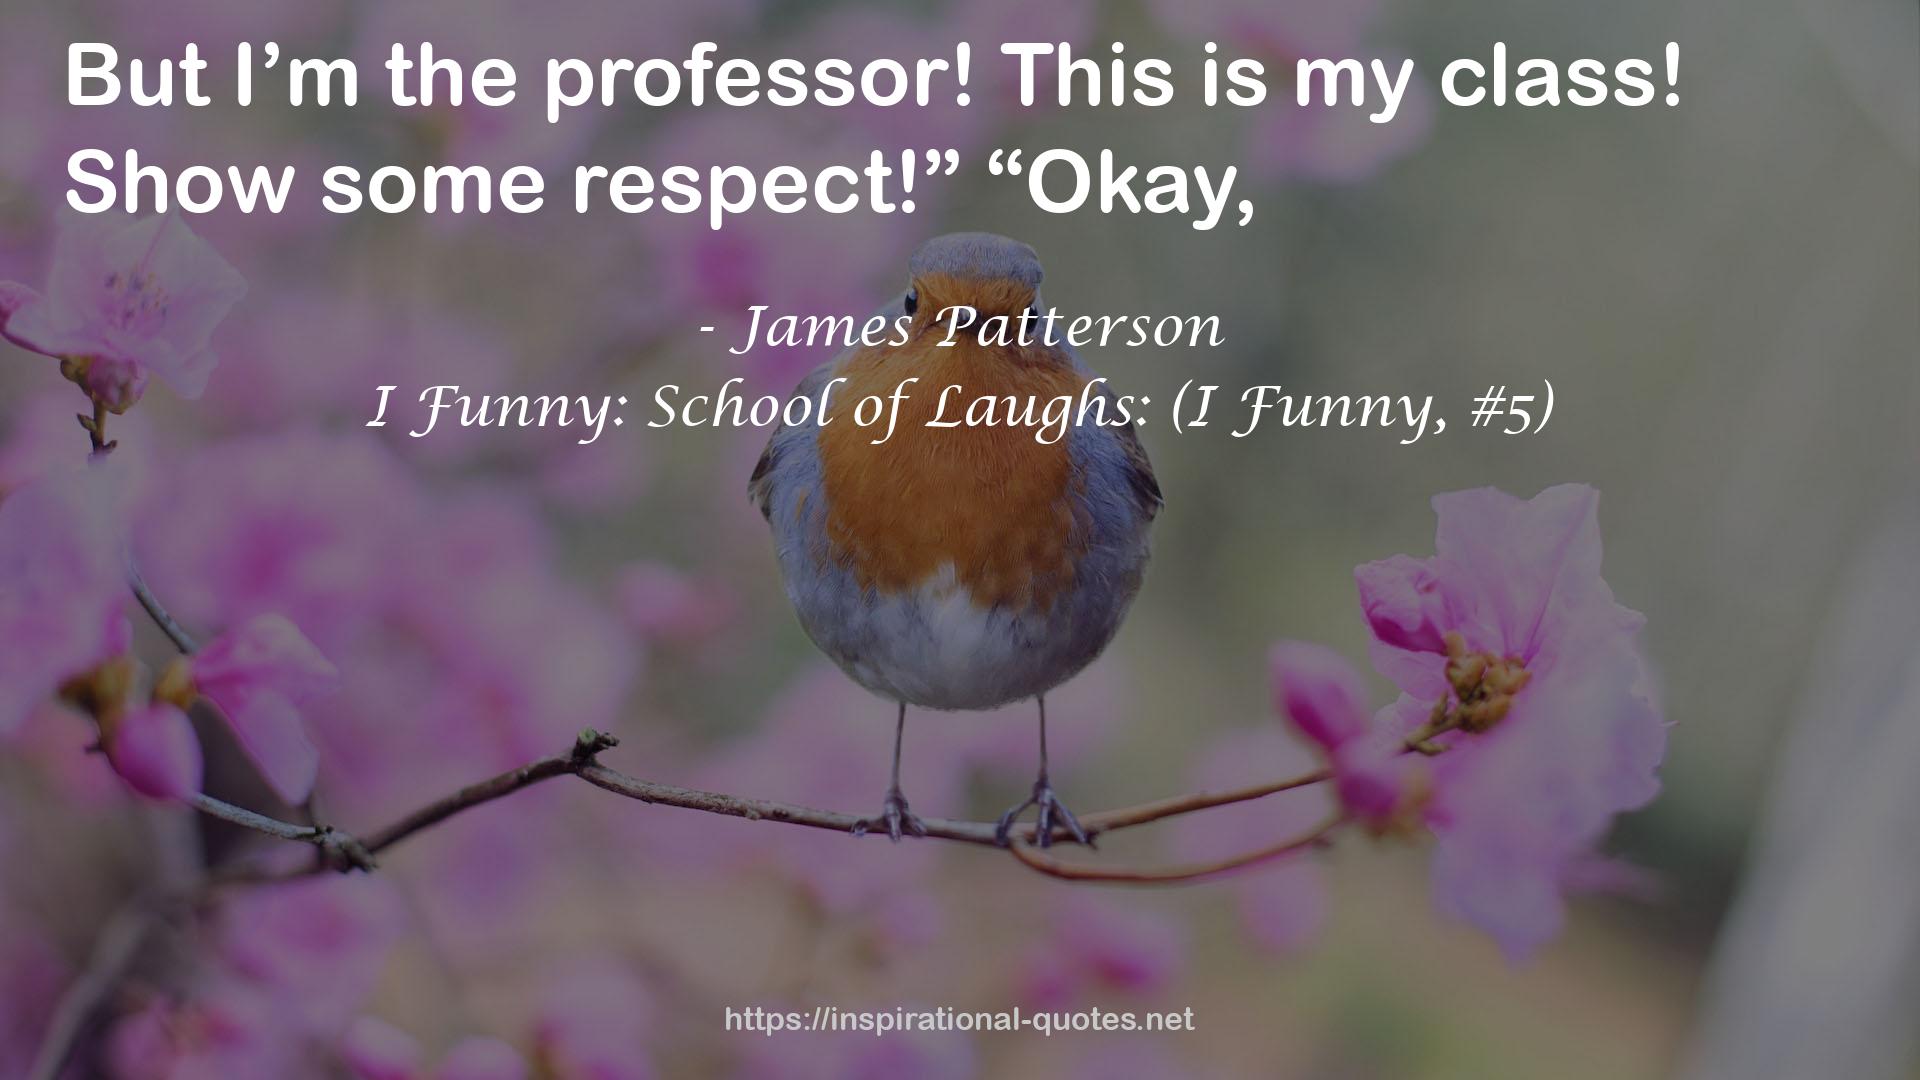 I Funny: School of Laughs: (I Funny, #5) QUOTES